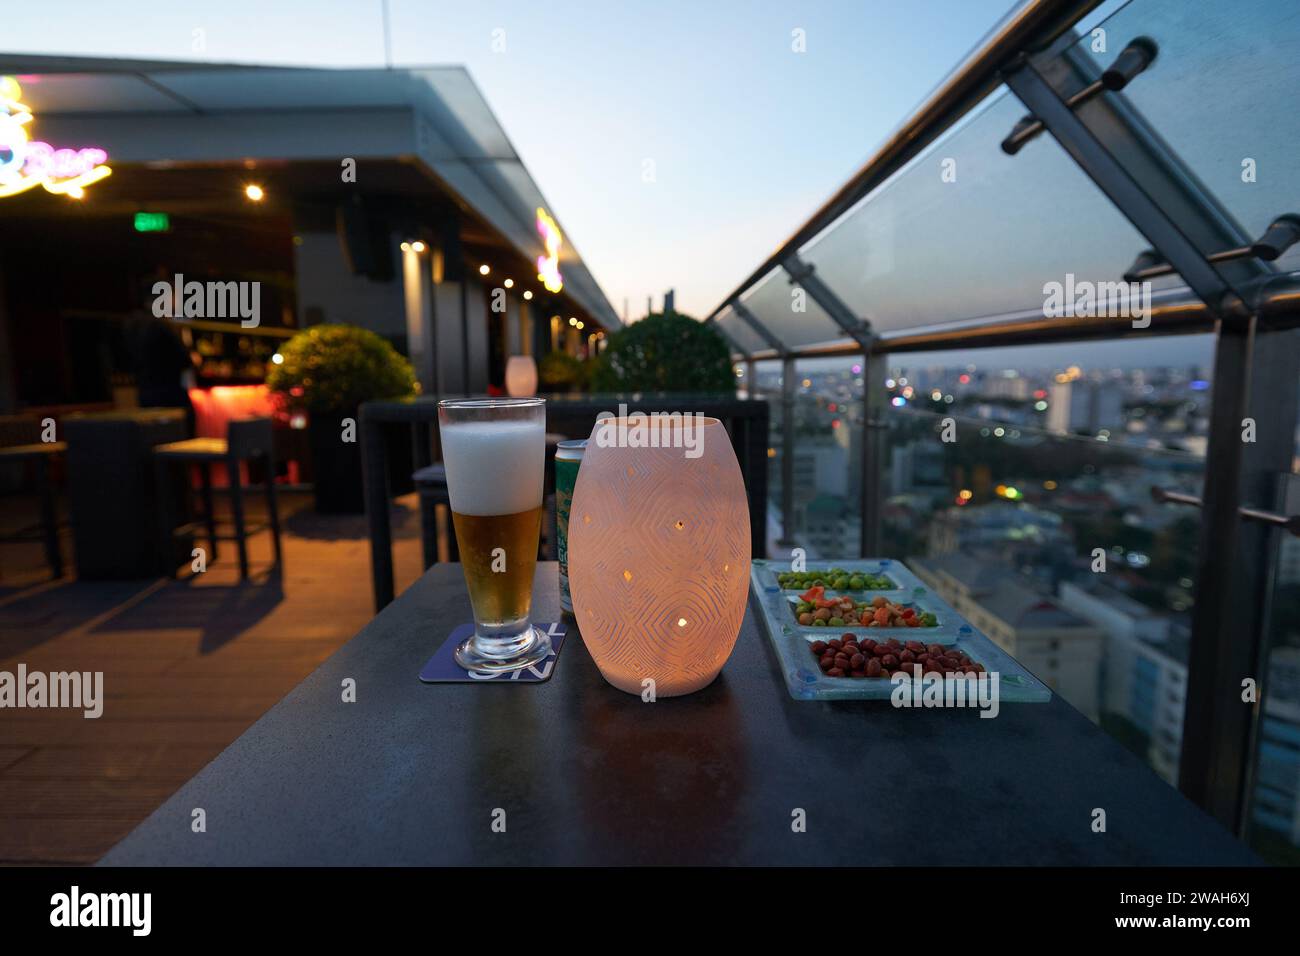 HO CHI MINH CITY, VIETNAM - MARCH 26, 2023: beer and snacks served on a table at outdoor terrace of OnTop Bar, a rooftop bar located on the 20th floor Stock Photo